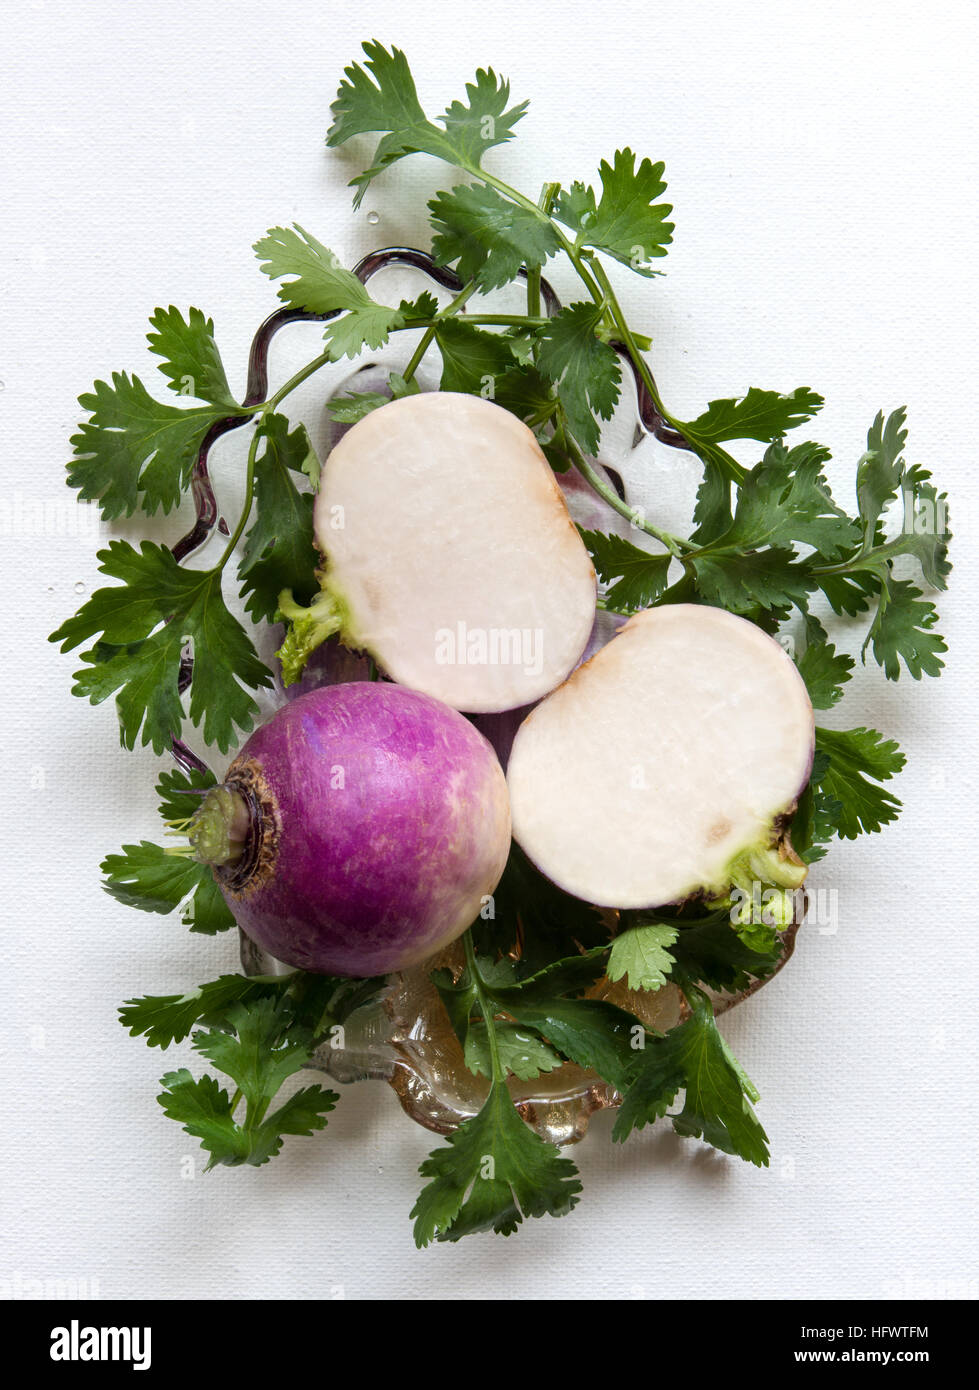 Turnip the vegetable cut & whole dressed with coriander leaves, top view white background Stock Photo